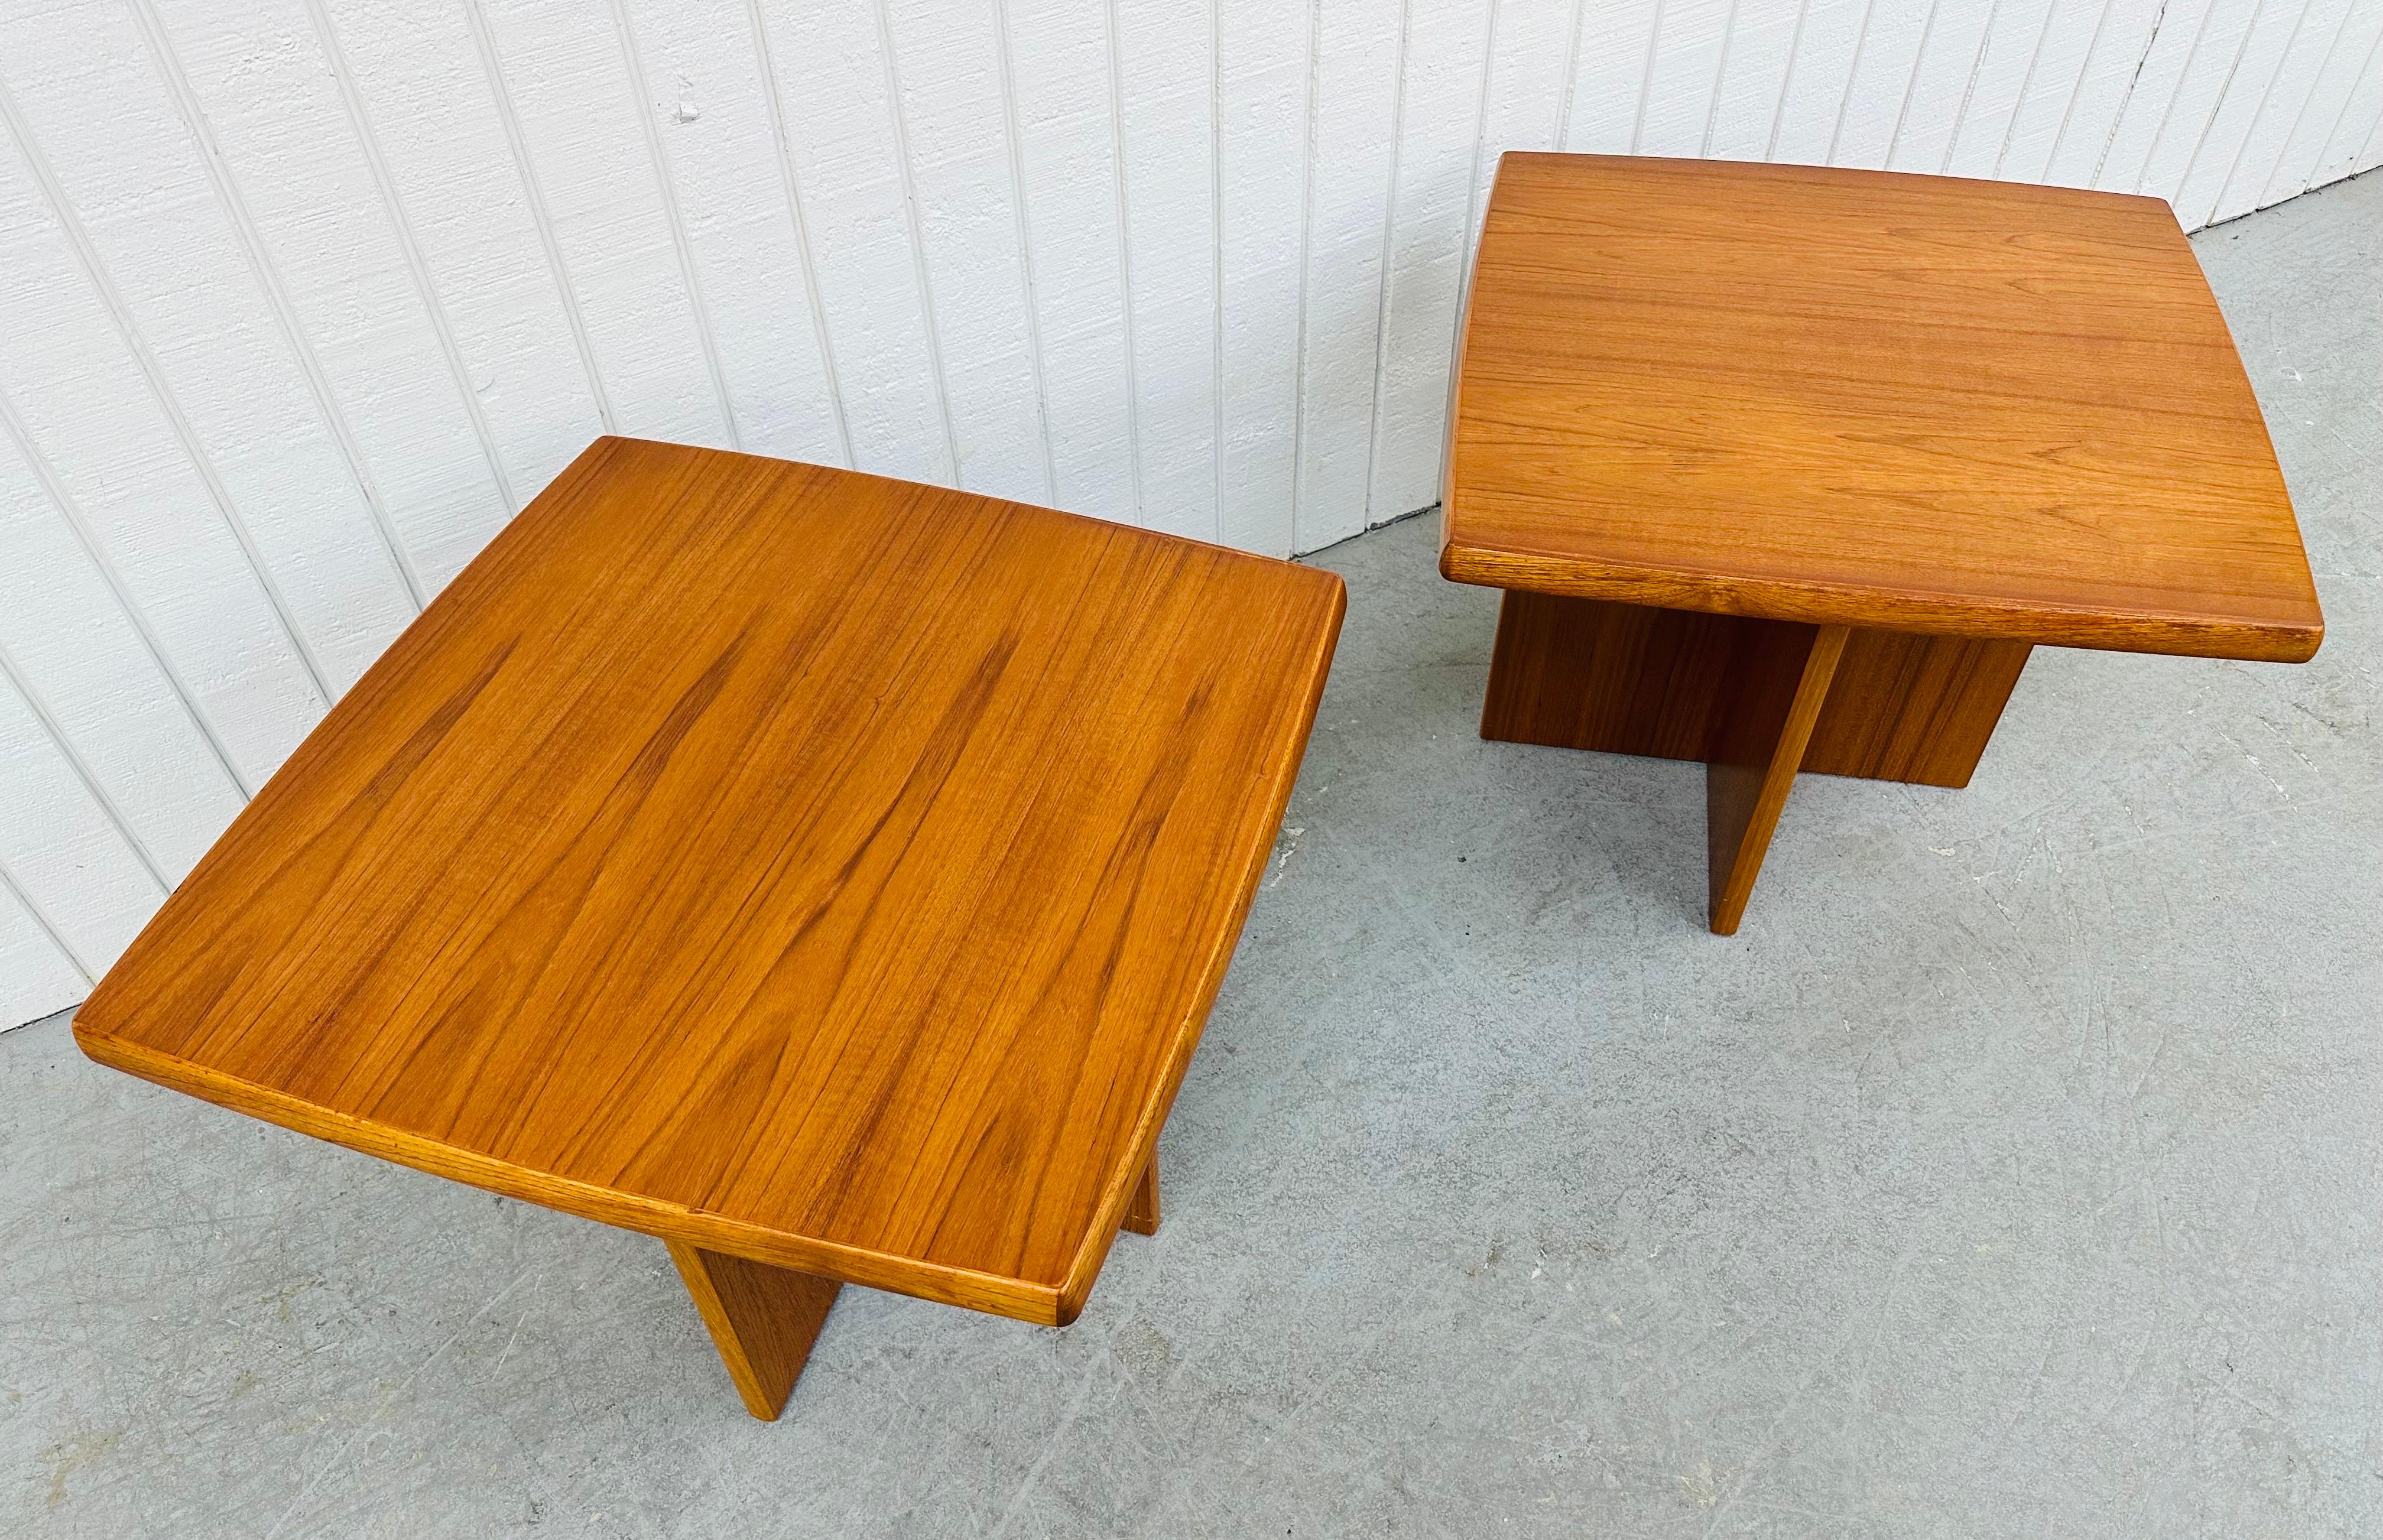 This listing is for a pair of vintage Danish Modern Teak Side Tables. Featuring a straight line square top design, cross pedestal base, and a beautiful teak finish. This is an exceptional combination of quality and design made in Denmark!